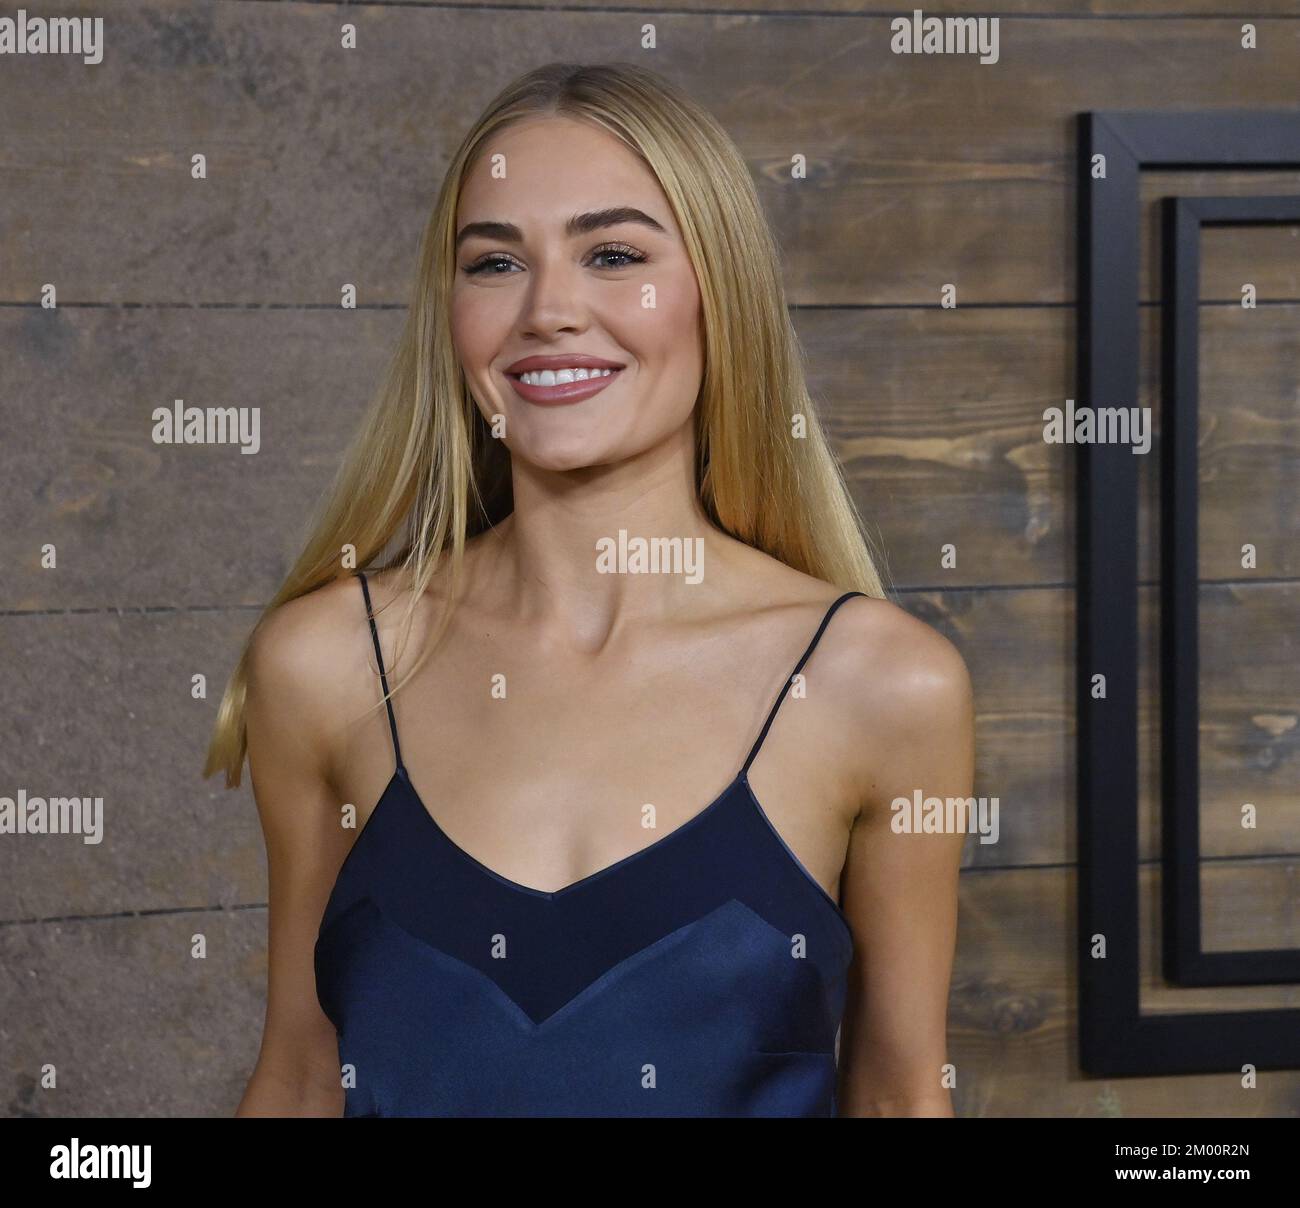 Los Angeles, United States. 02nd Dec, 2022. Cast member Michelle Randolph attends the premiere of Paramount 's western drama TV series '1923' at Hollywood American Legion Post 43 in Los Angeles on Friday, December 2, 2022. Storyline: The Duttons face a new set of challenges in the early 20th century, including the rise of Western expansion, Prohibition and the Great Depression. Photo by Jim Ruymen/UPI Credit: UPI/Alamy Live News Stock Photo